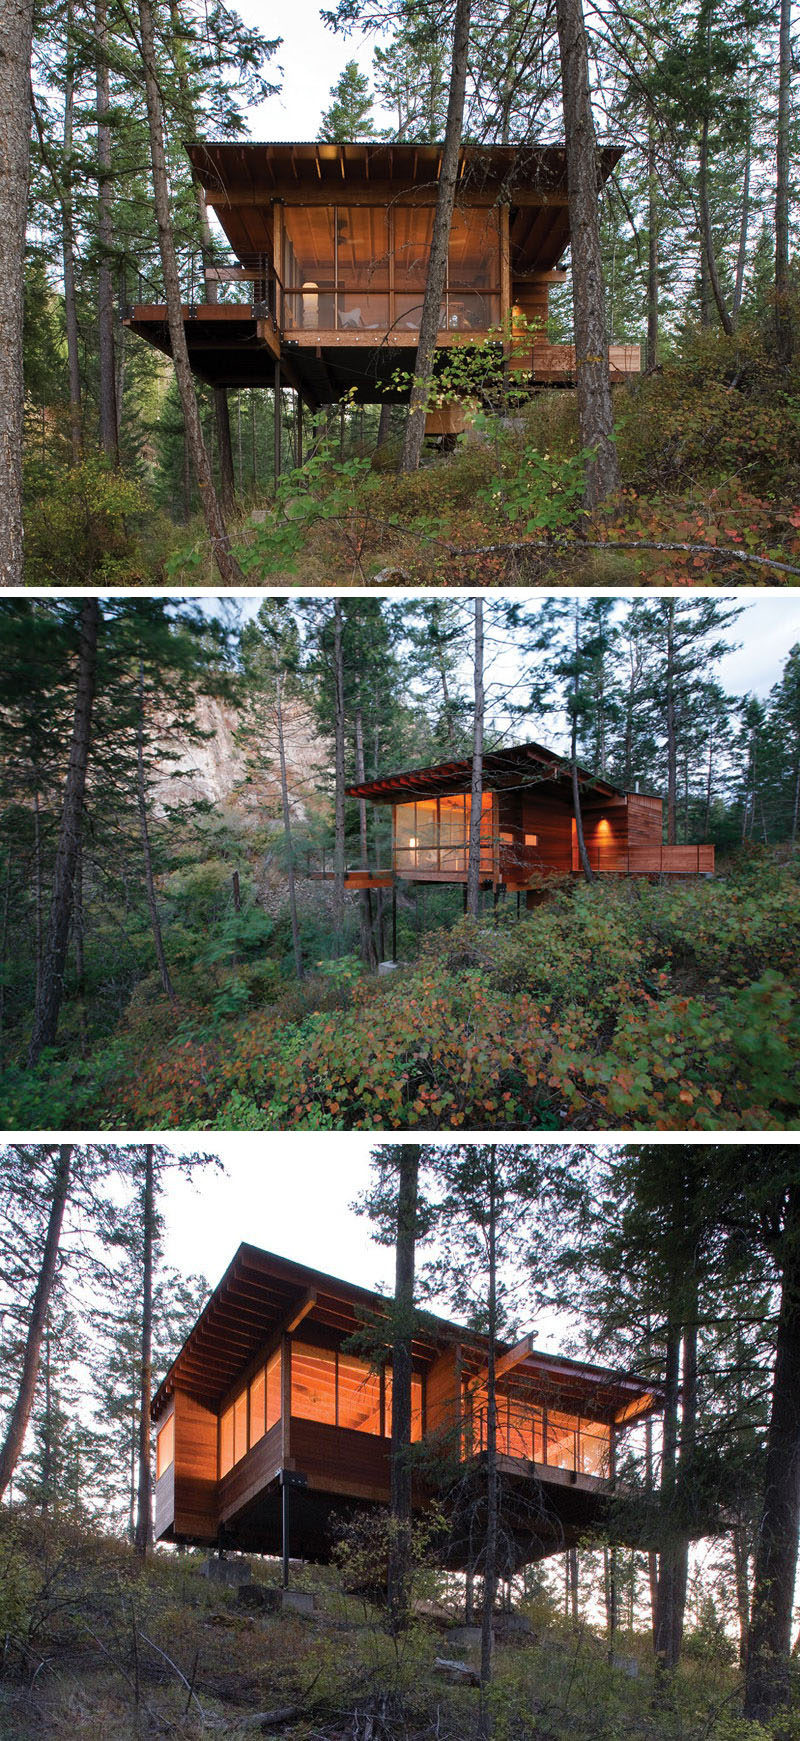 18 Modern House In The Forest // This forest house is lifted right up into the trees to provide better views of the surrounding vegetation.